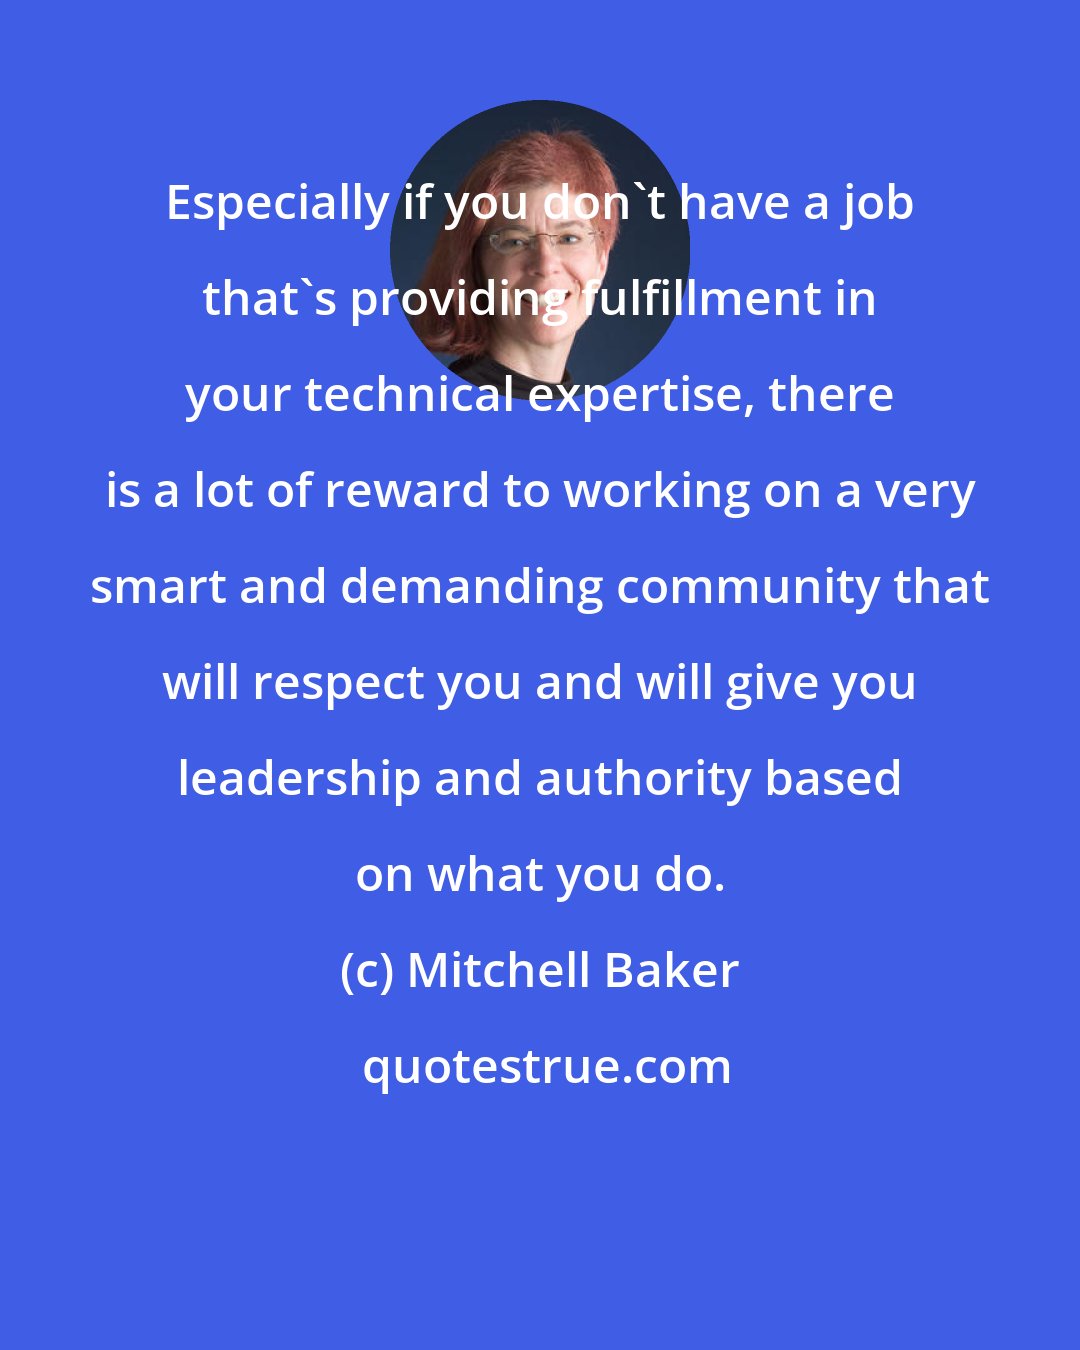 Mitchell Baker: Especially if you don't have a job that's providing fulfillment in your technical expertise, there is a lot of reward to working on a very smart and demanding community that will respect you and will give you leadership and authority based on what you do.